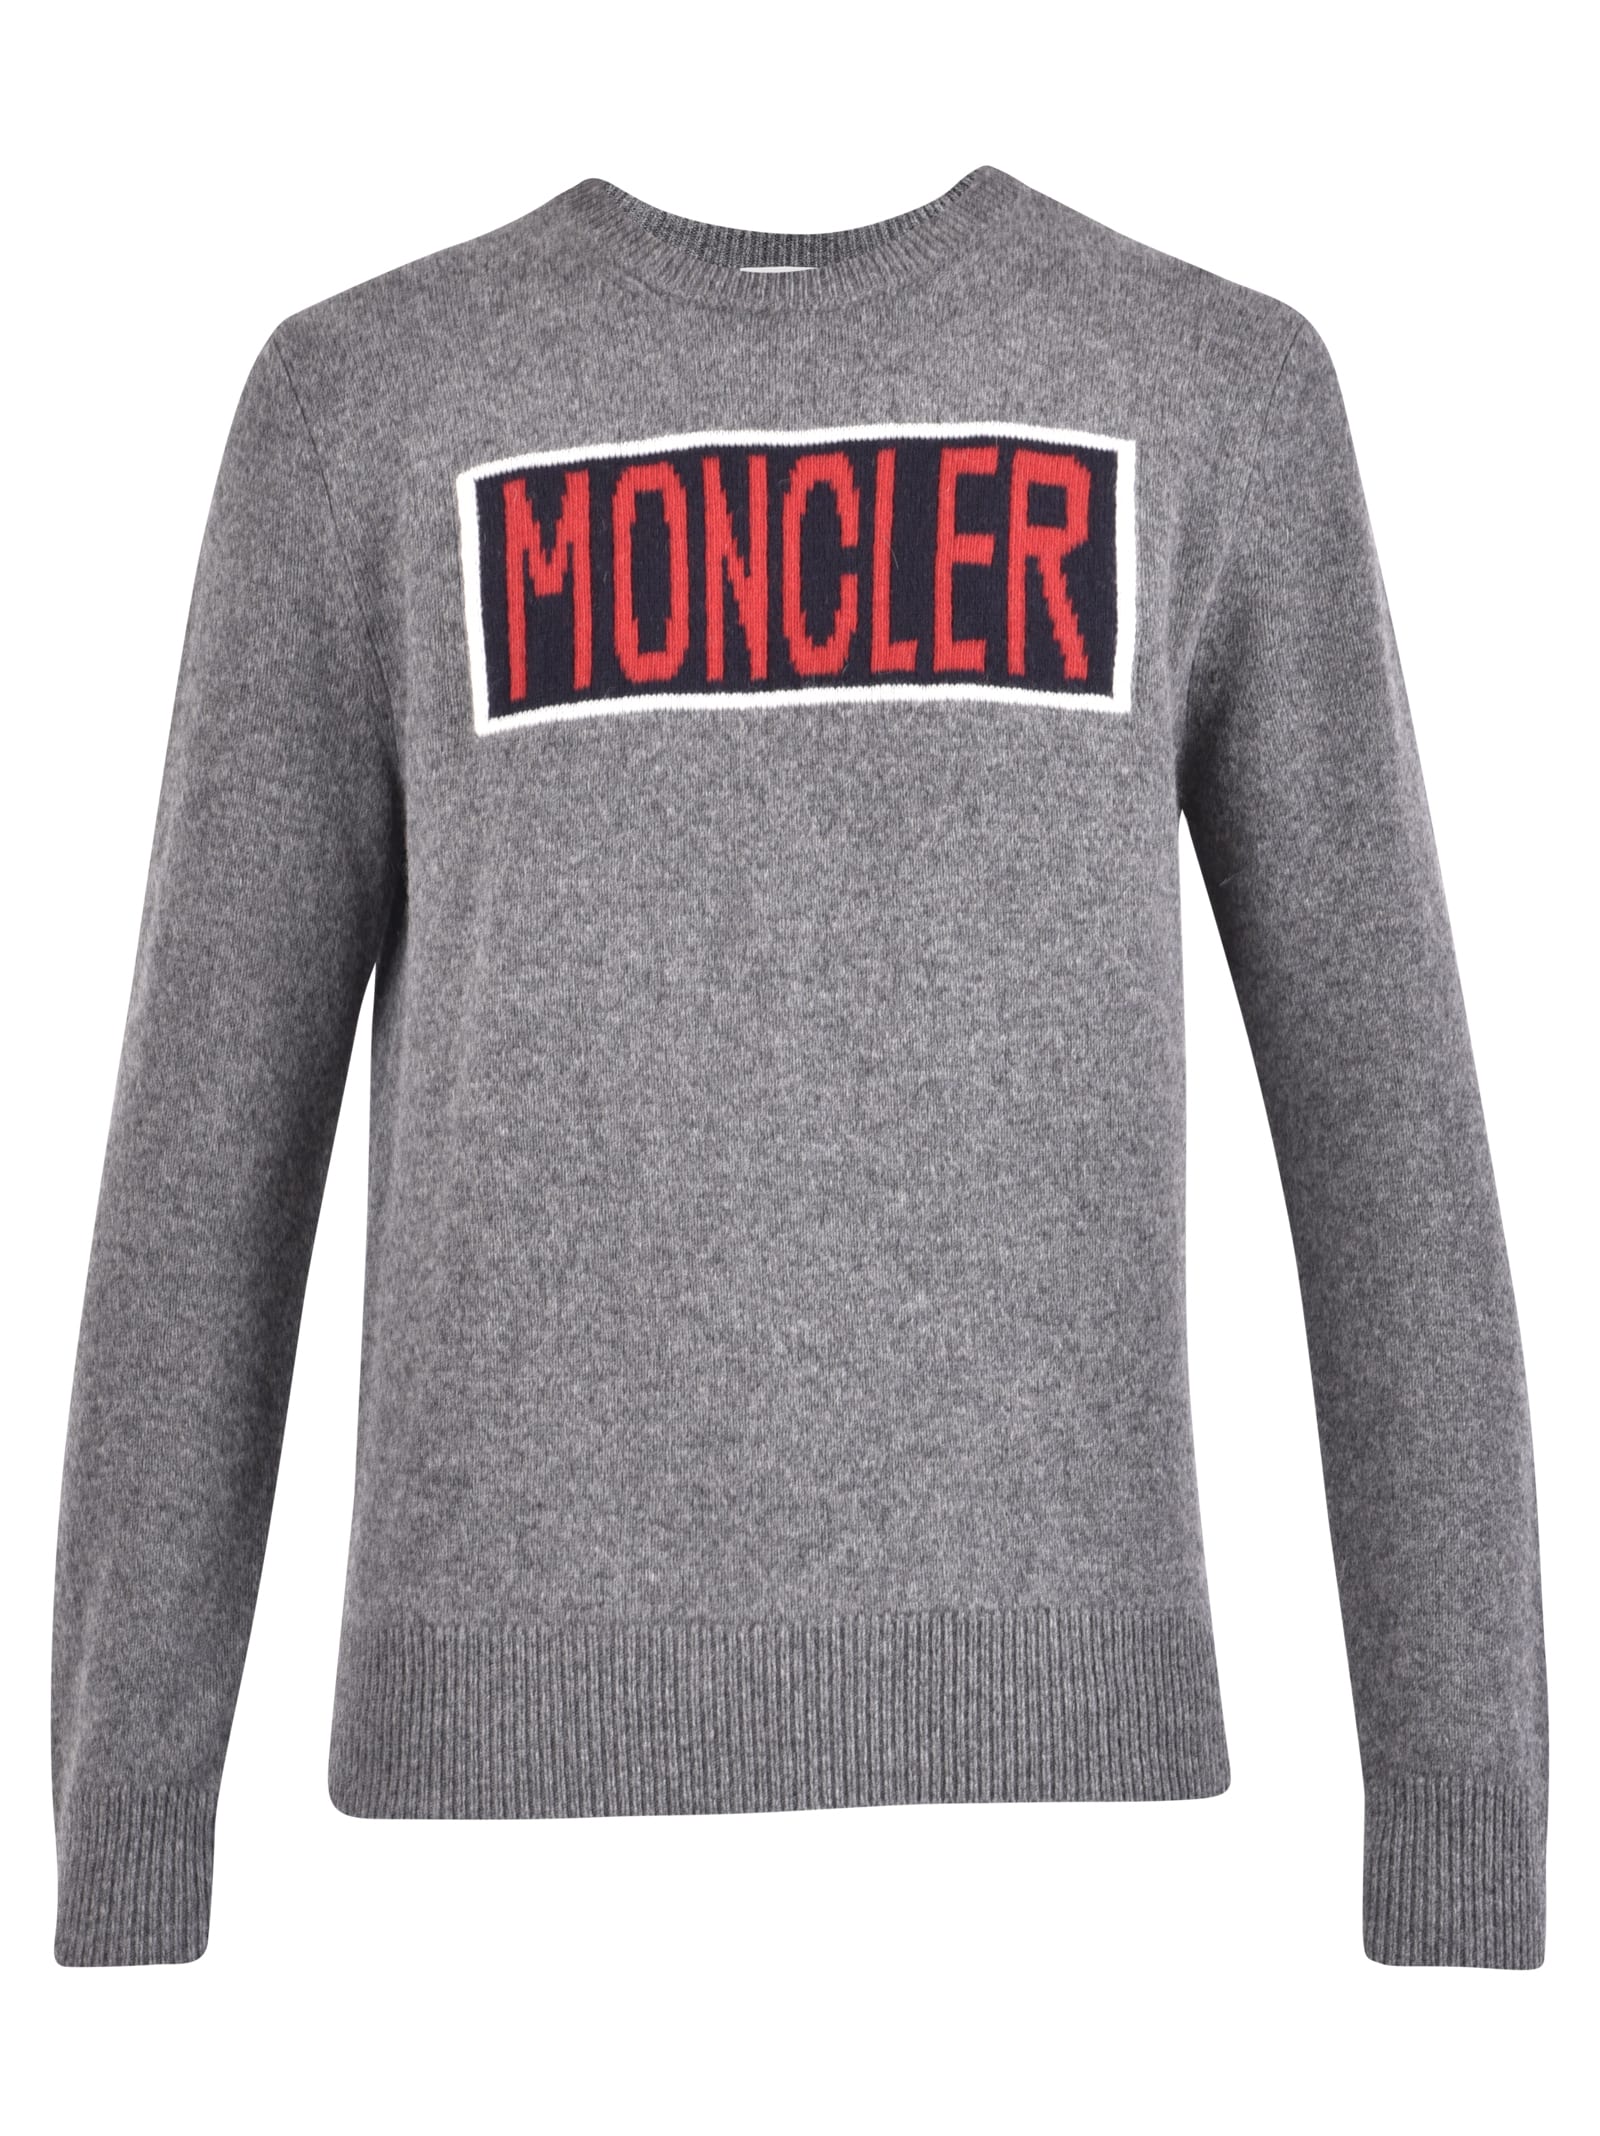 MONCLER BRANDED SWEATER,11139614